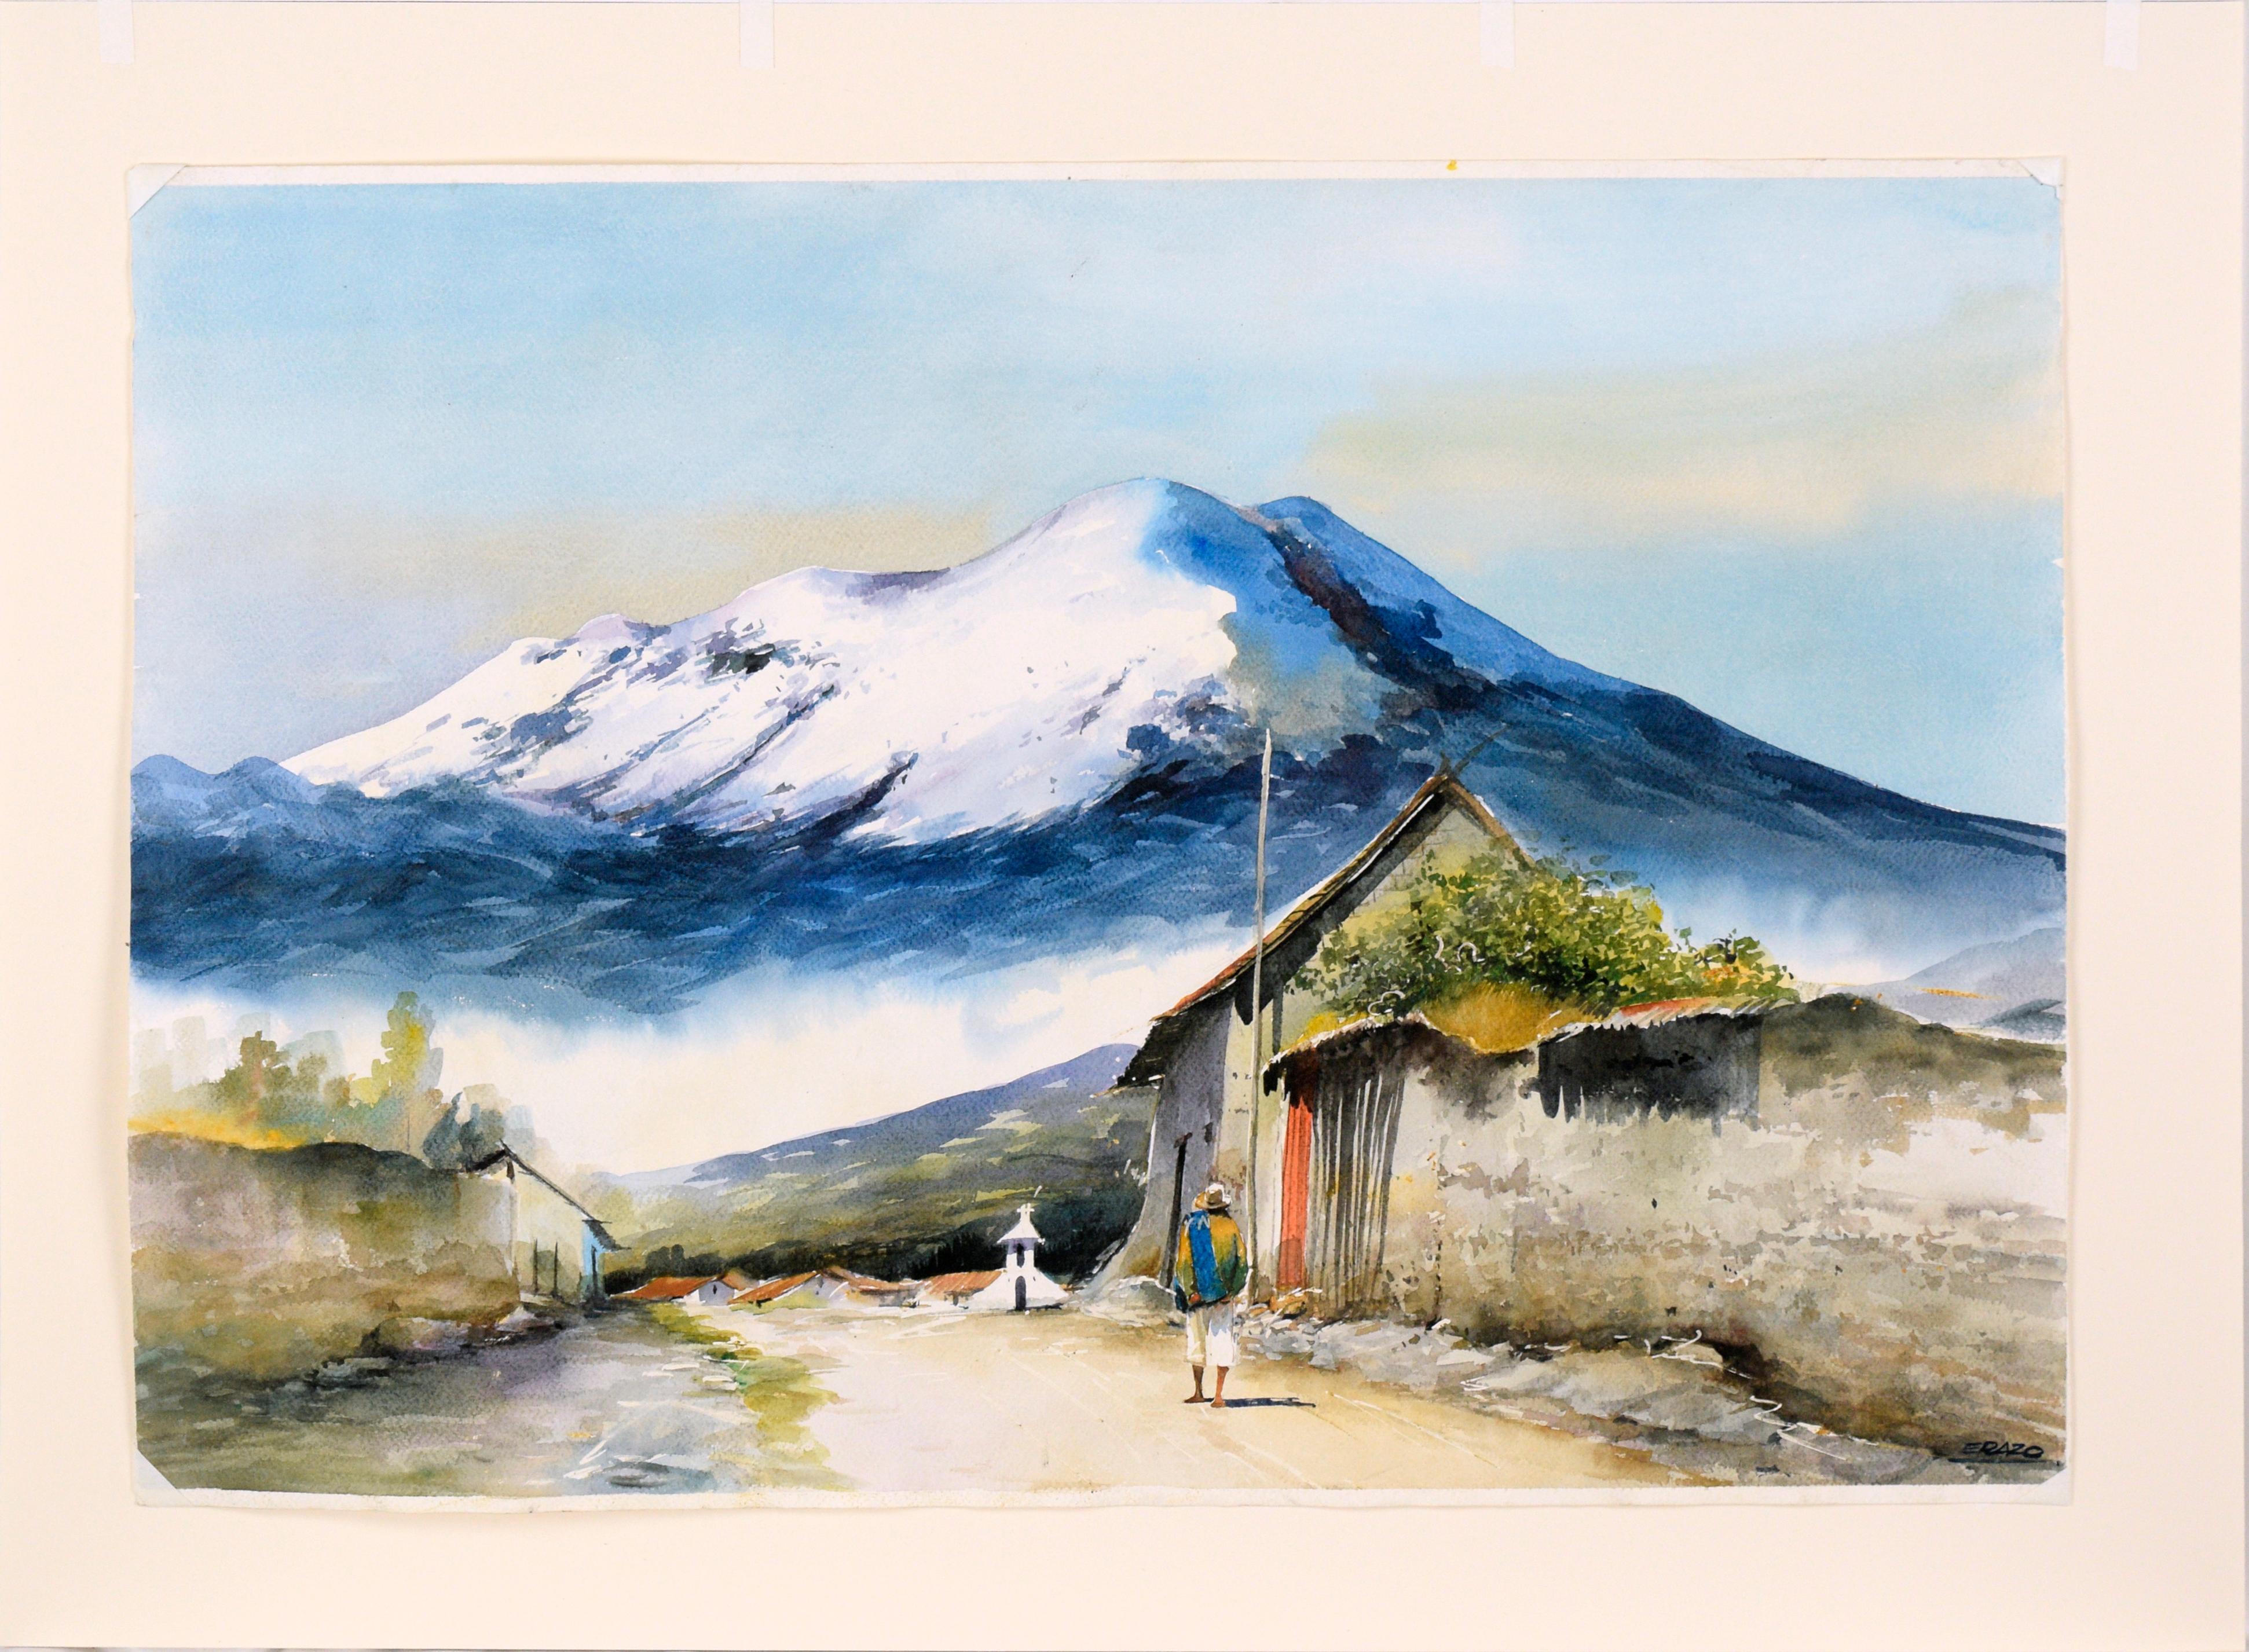 Village at the Base of the Andes Mountains - Watercolor Landscape on Paper For Sale 1